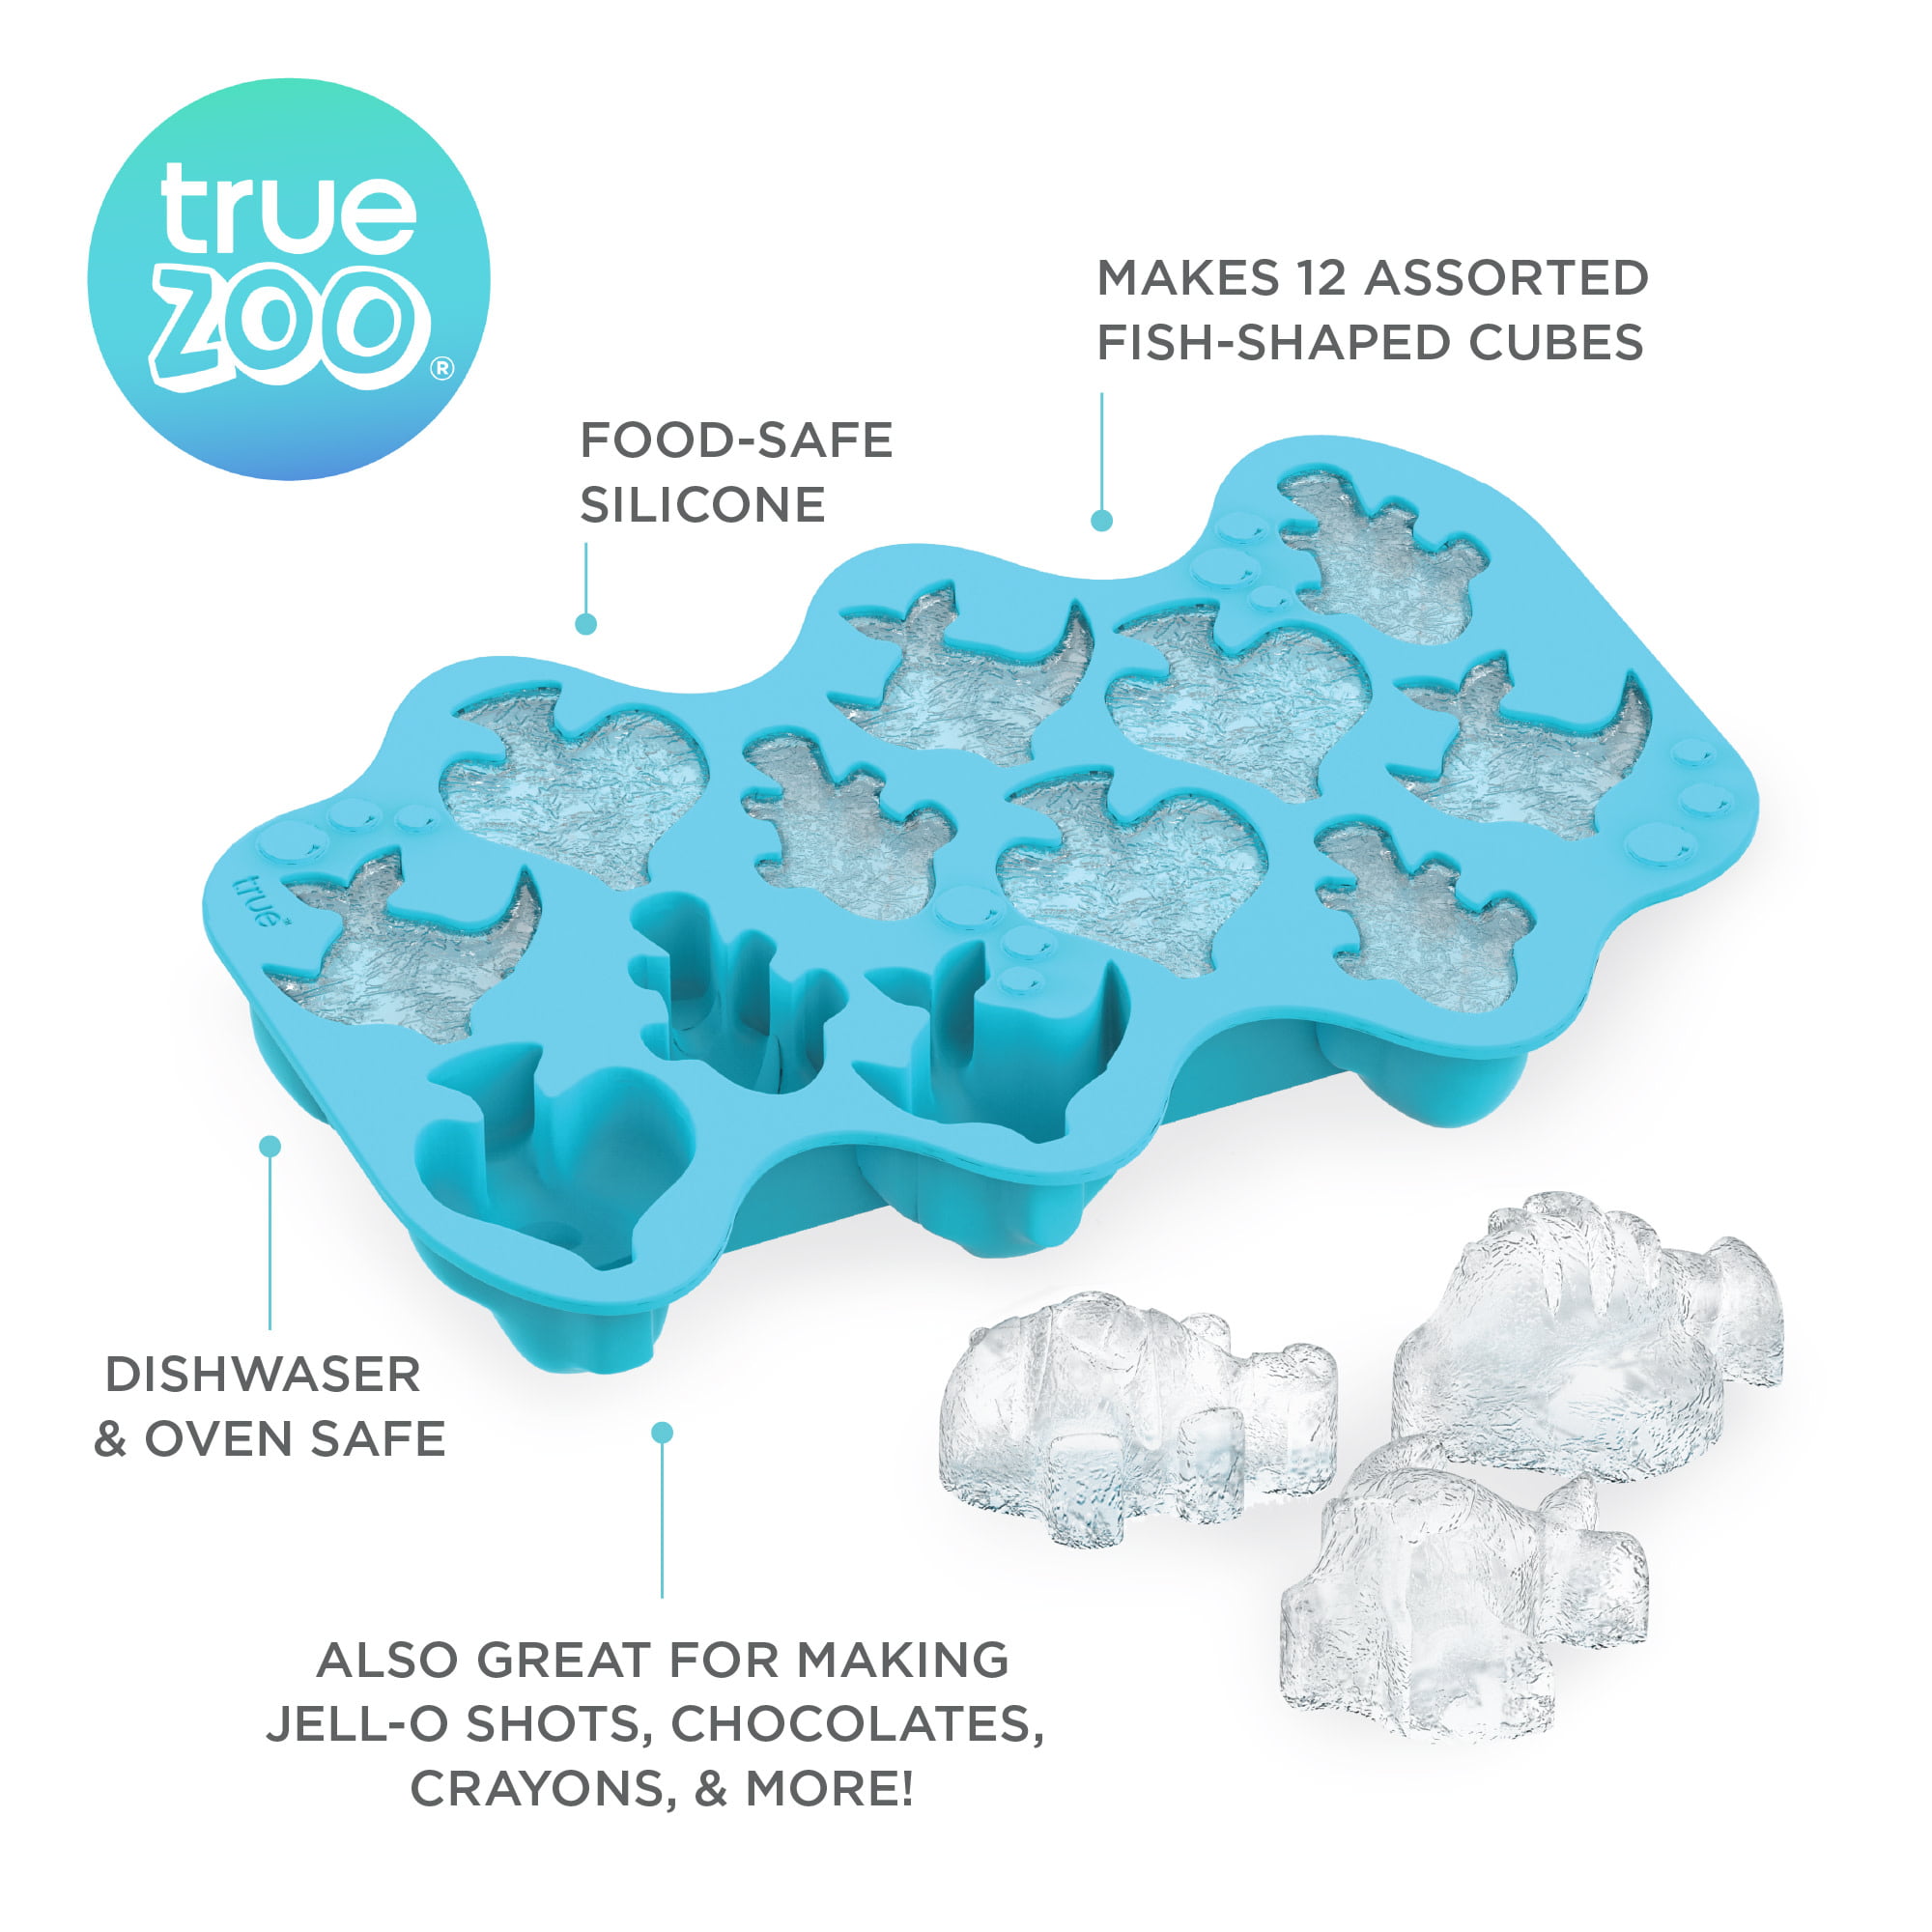 True Zoo U Ice of A, BPA-Free Silicone Ice Cube Tray, USA Ice Mold, Novelty  Ice July 4th Party Supplies, Dishwasher Safe, Blue, 38 Cubes